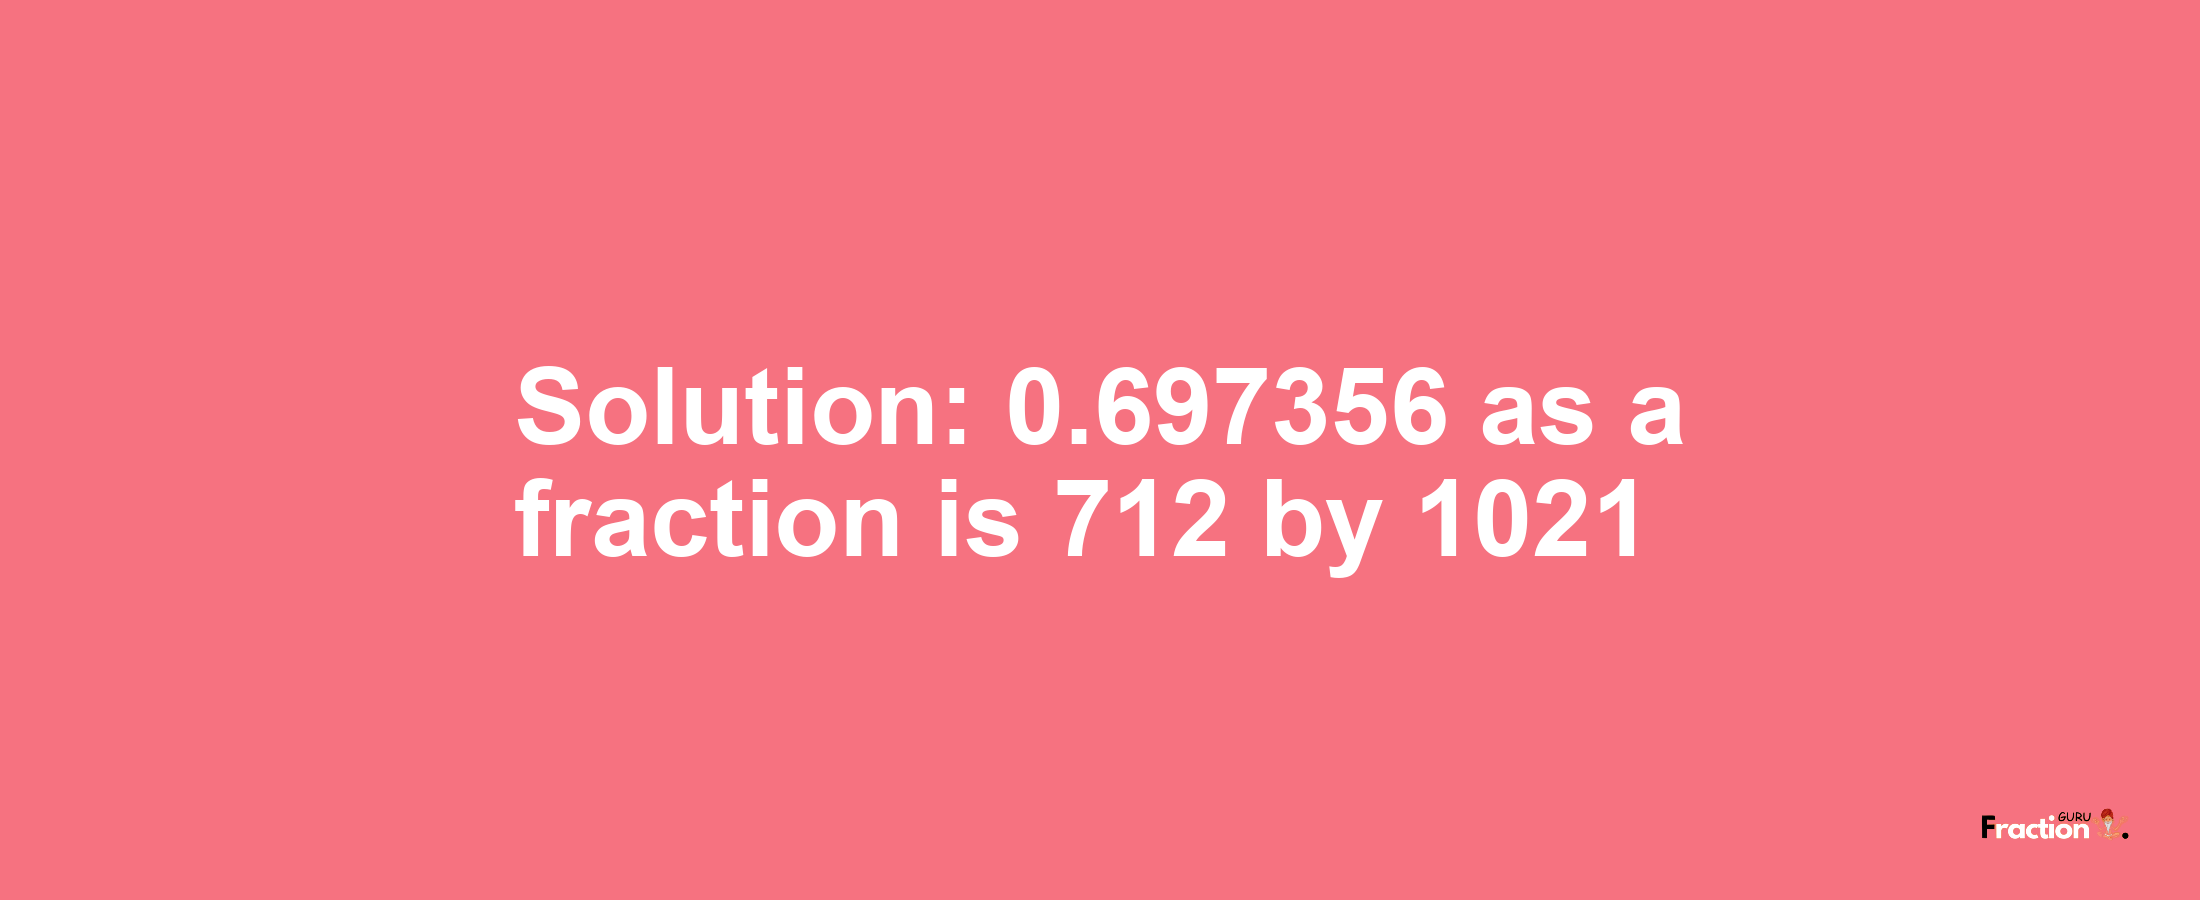 Solution:0.697356 as a fraction is 712/1021